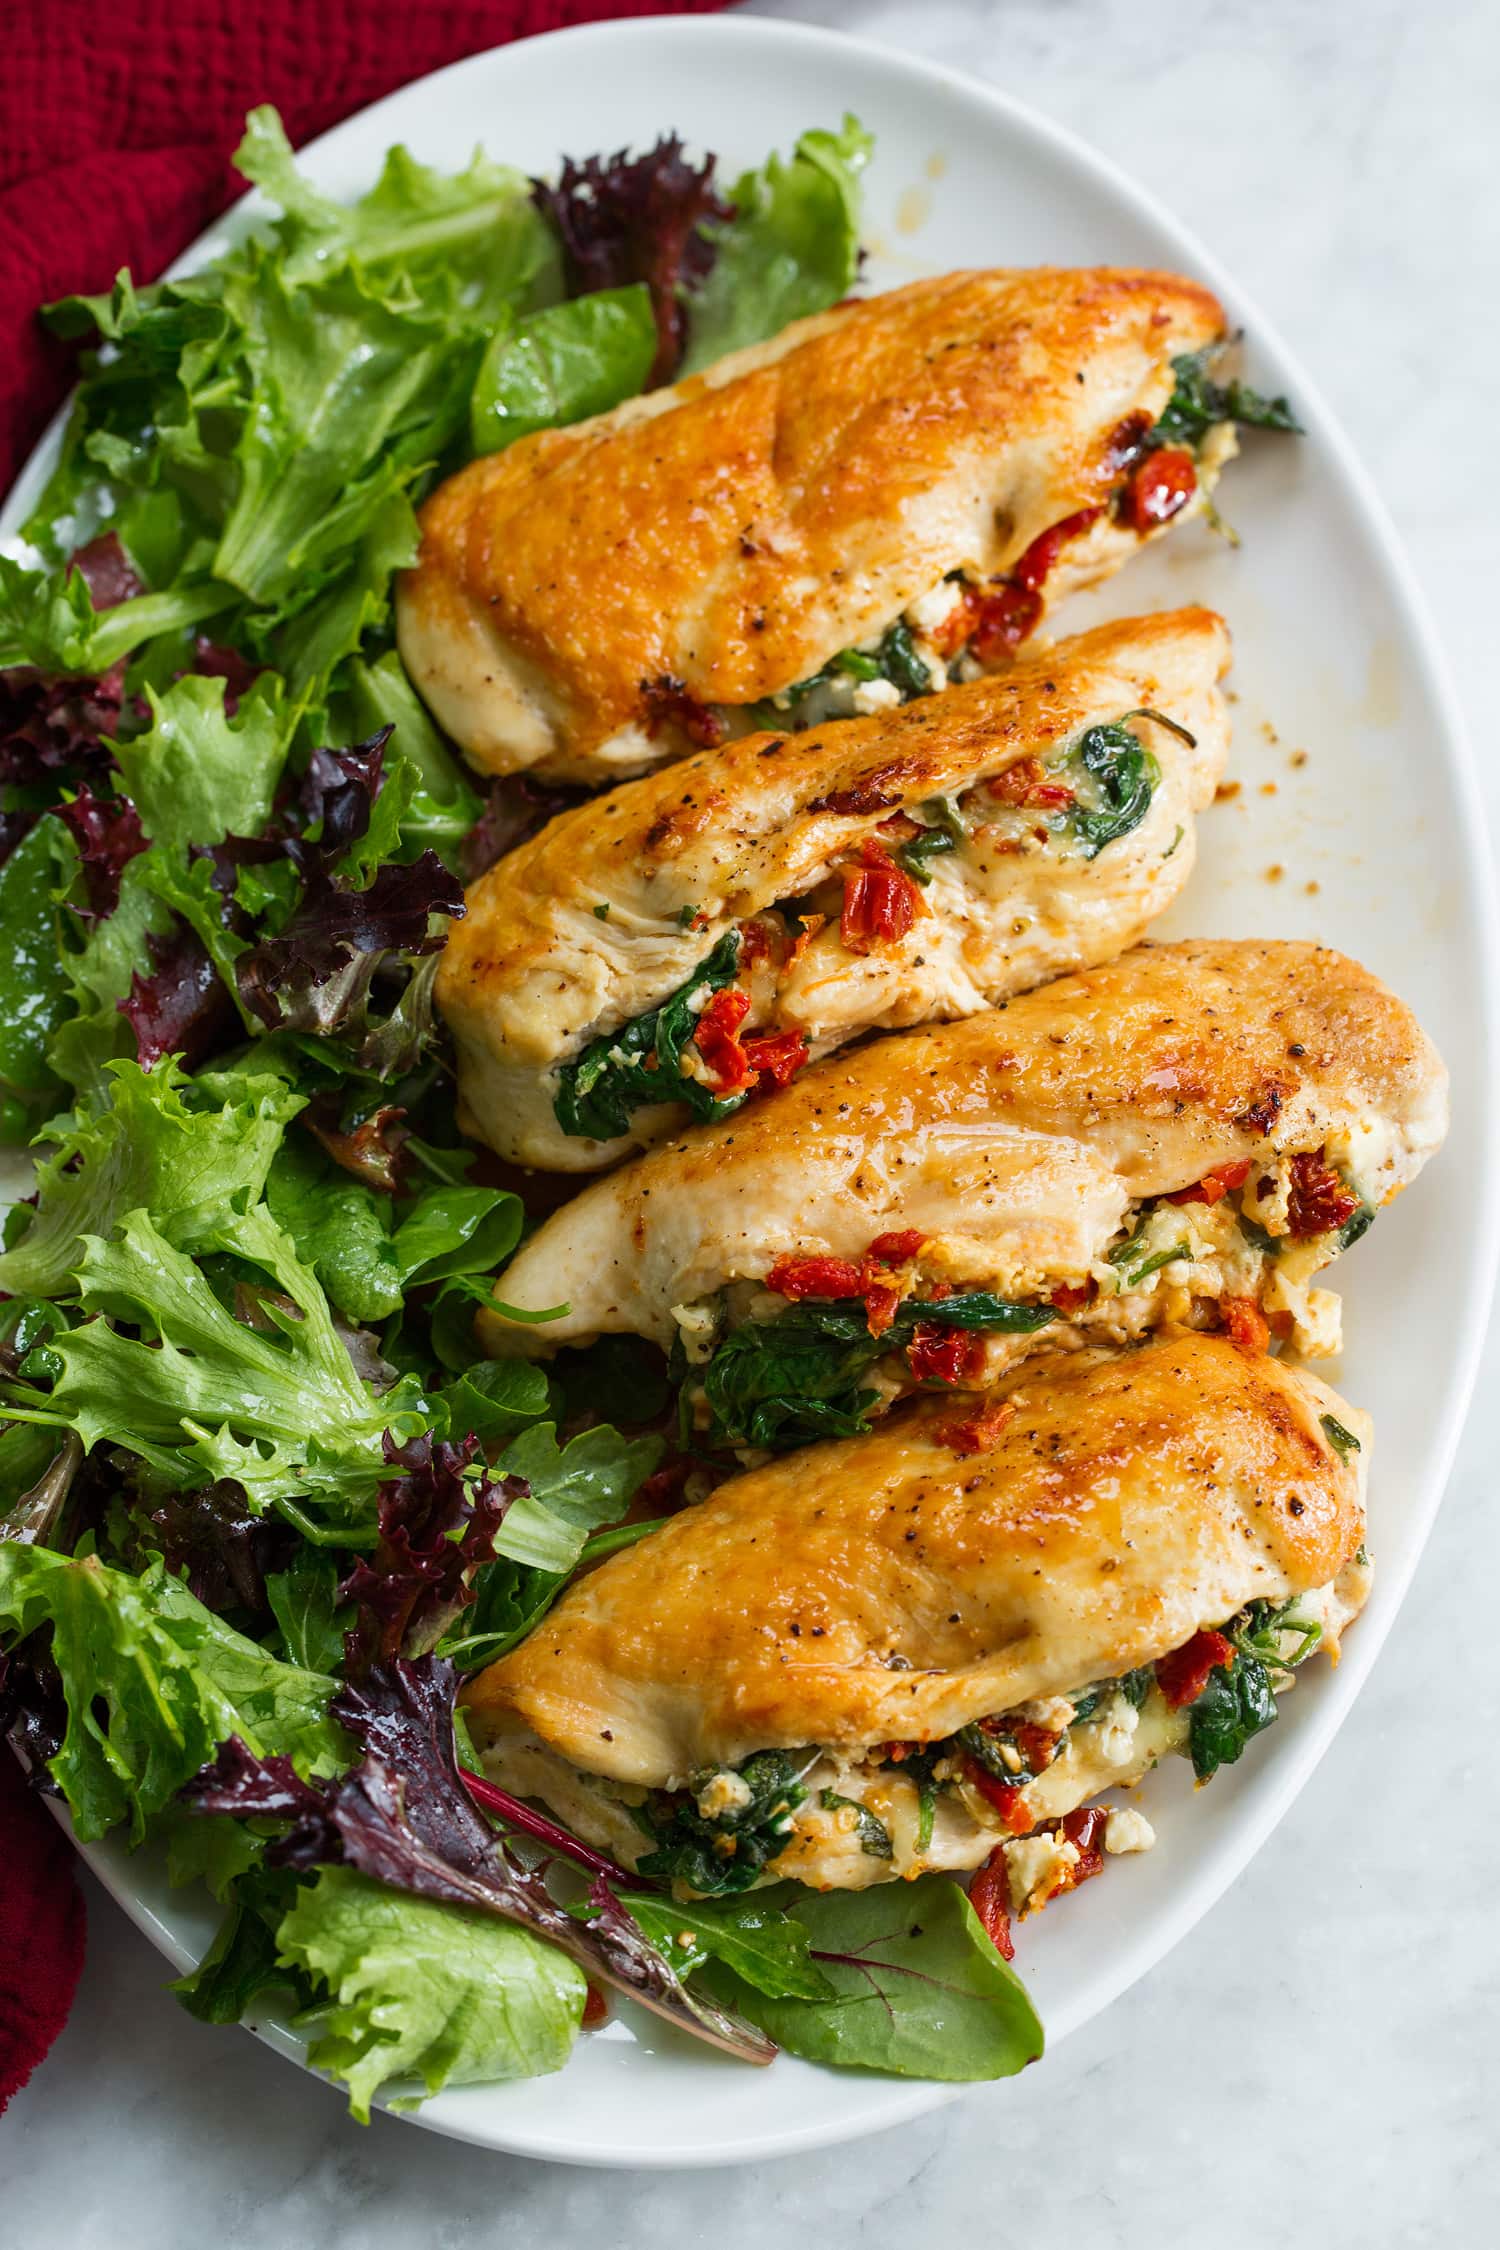 Stuffed chicken breasts on a platter with a side salad.